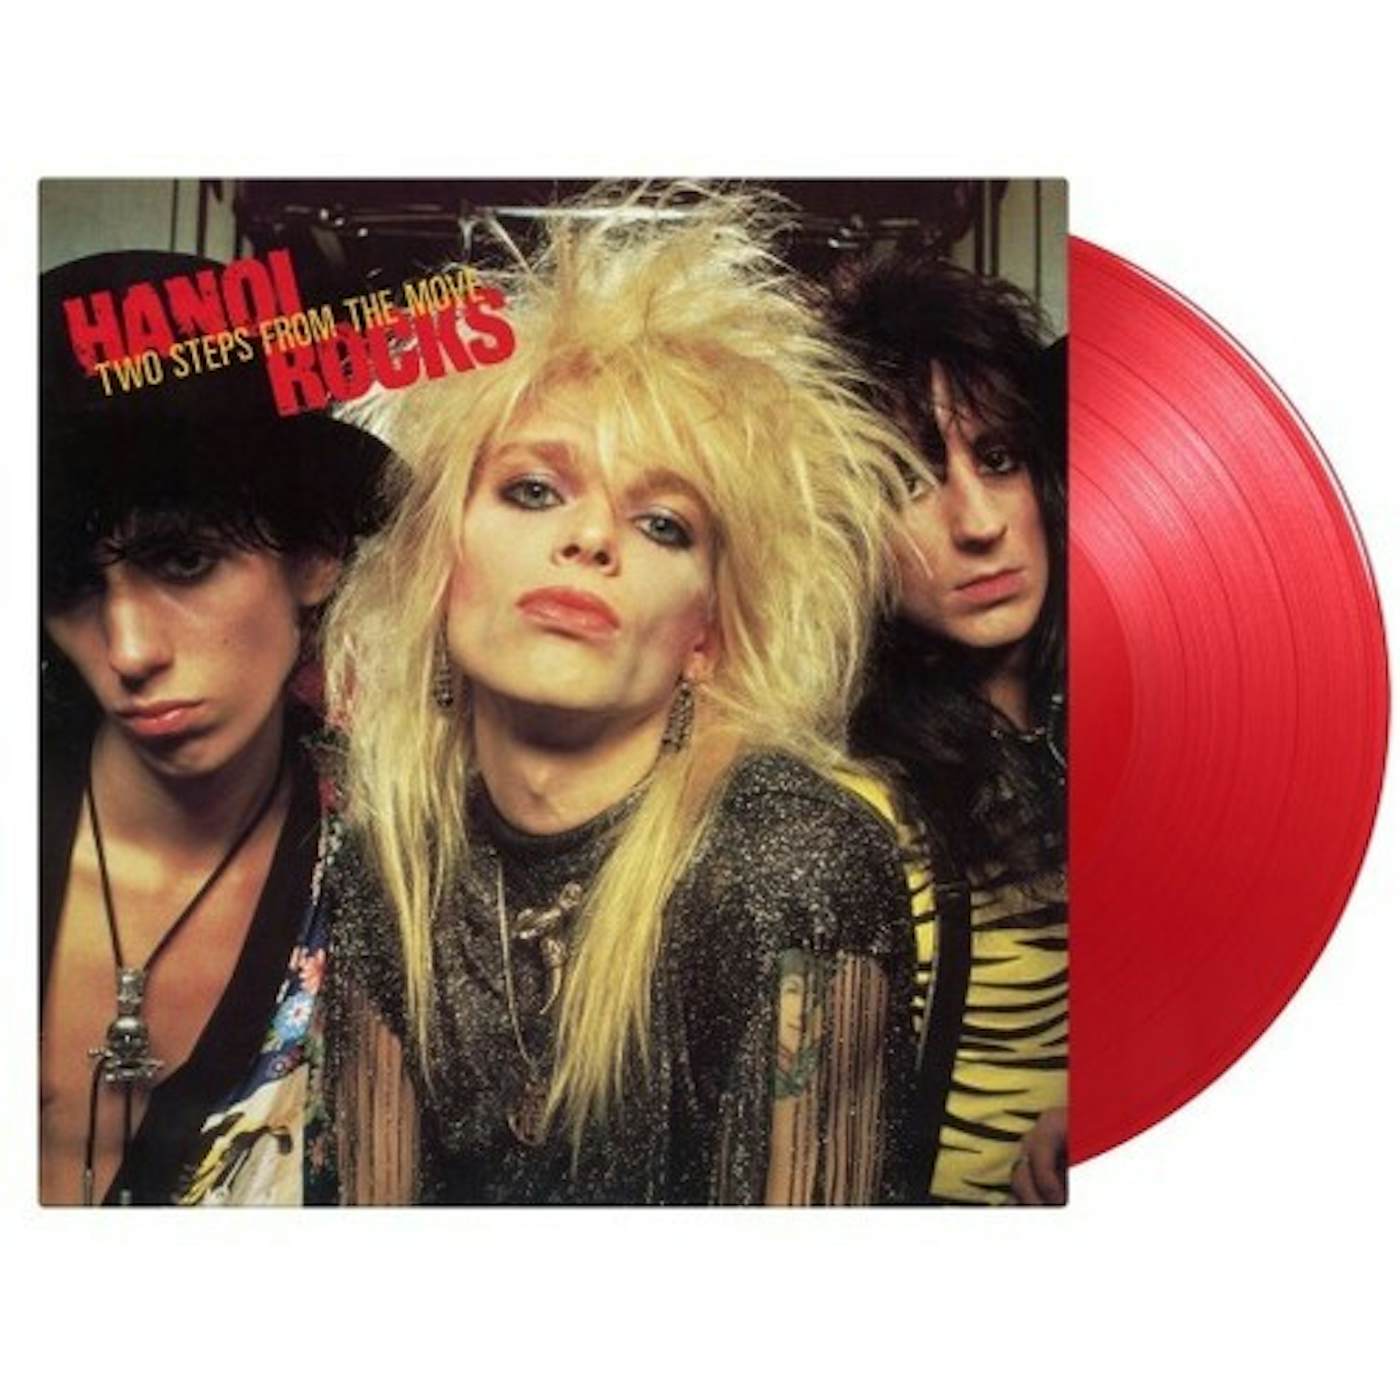 Hanoi Rocks Two Steps From The Move Vinyl Record